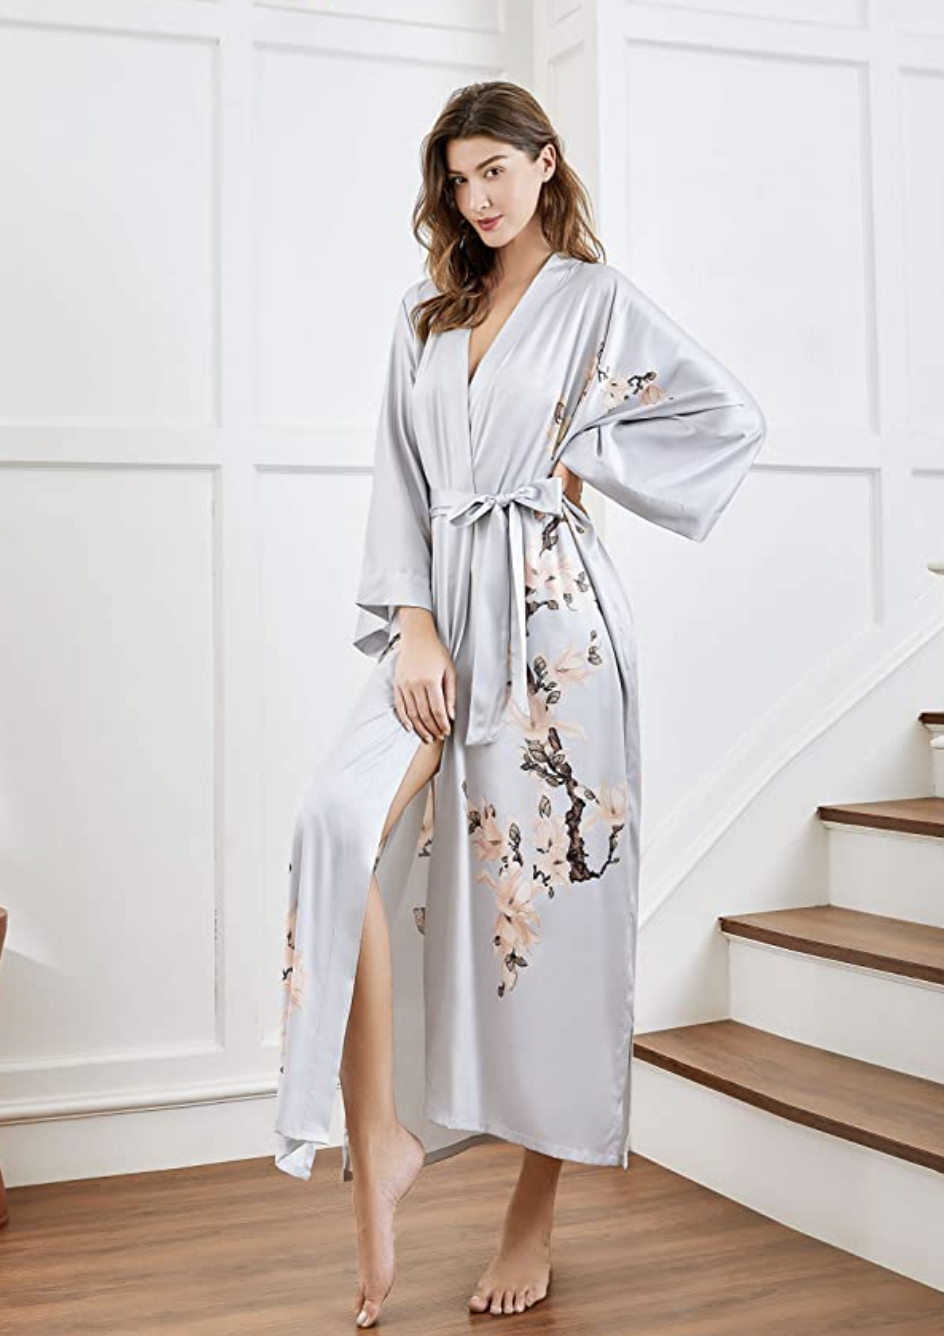 Luxury Silk Robes | Luxury Homeware & Collections | ESPA Home